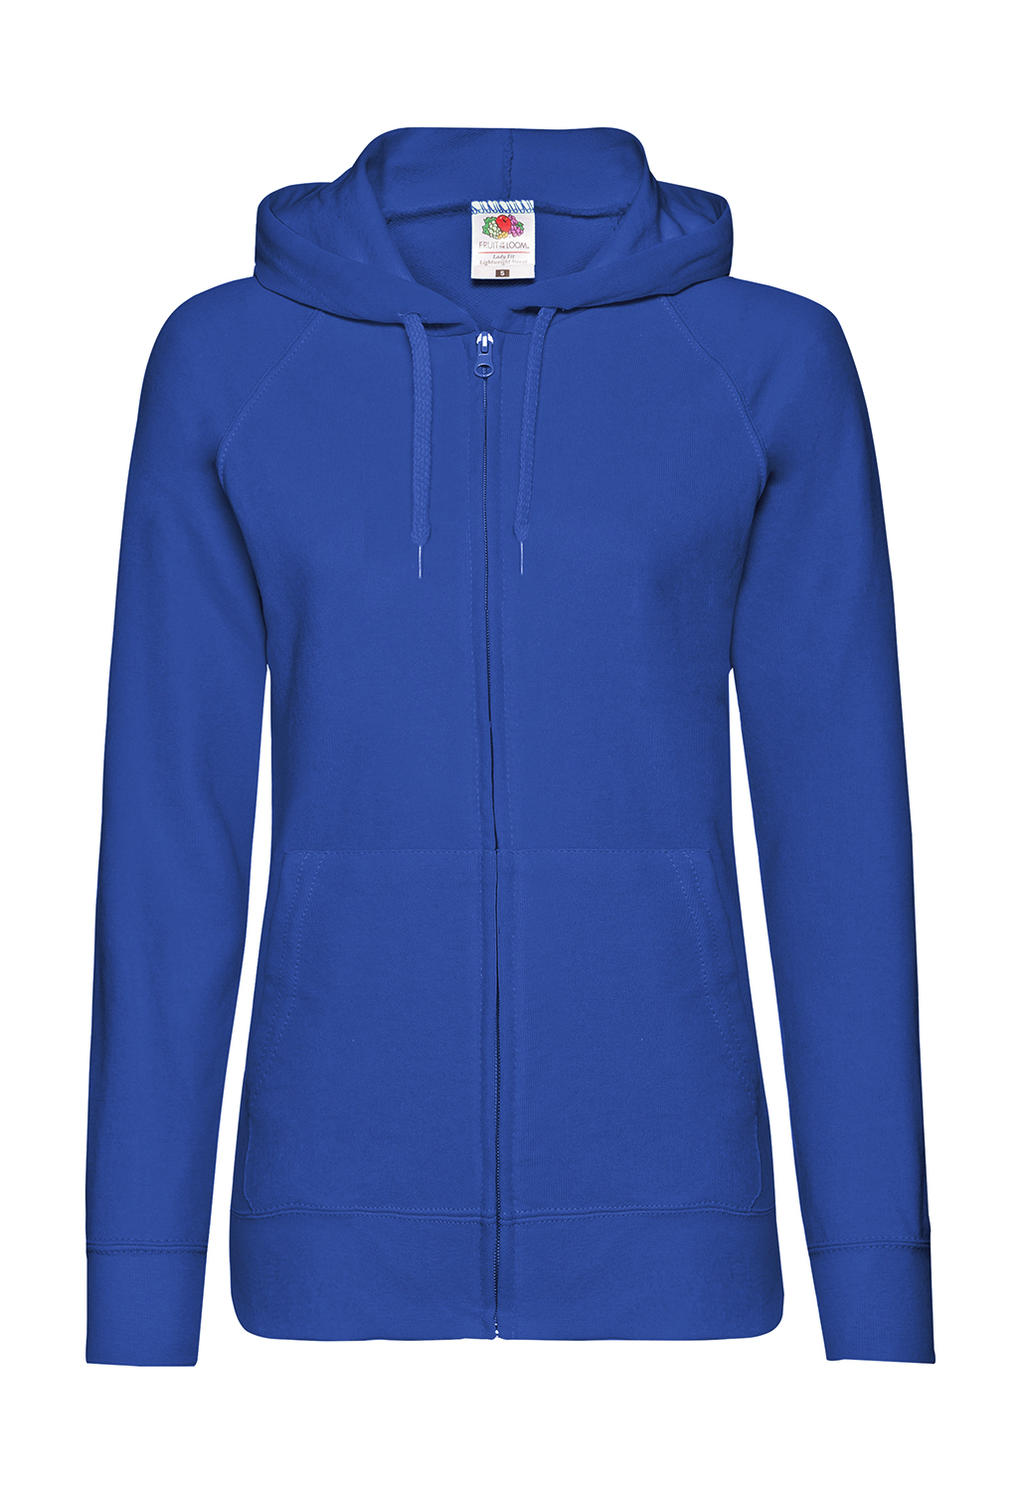  Ladies Lightweight Hooded Sweat Jacket in Farbe Royal